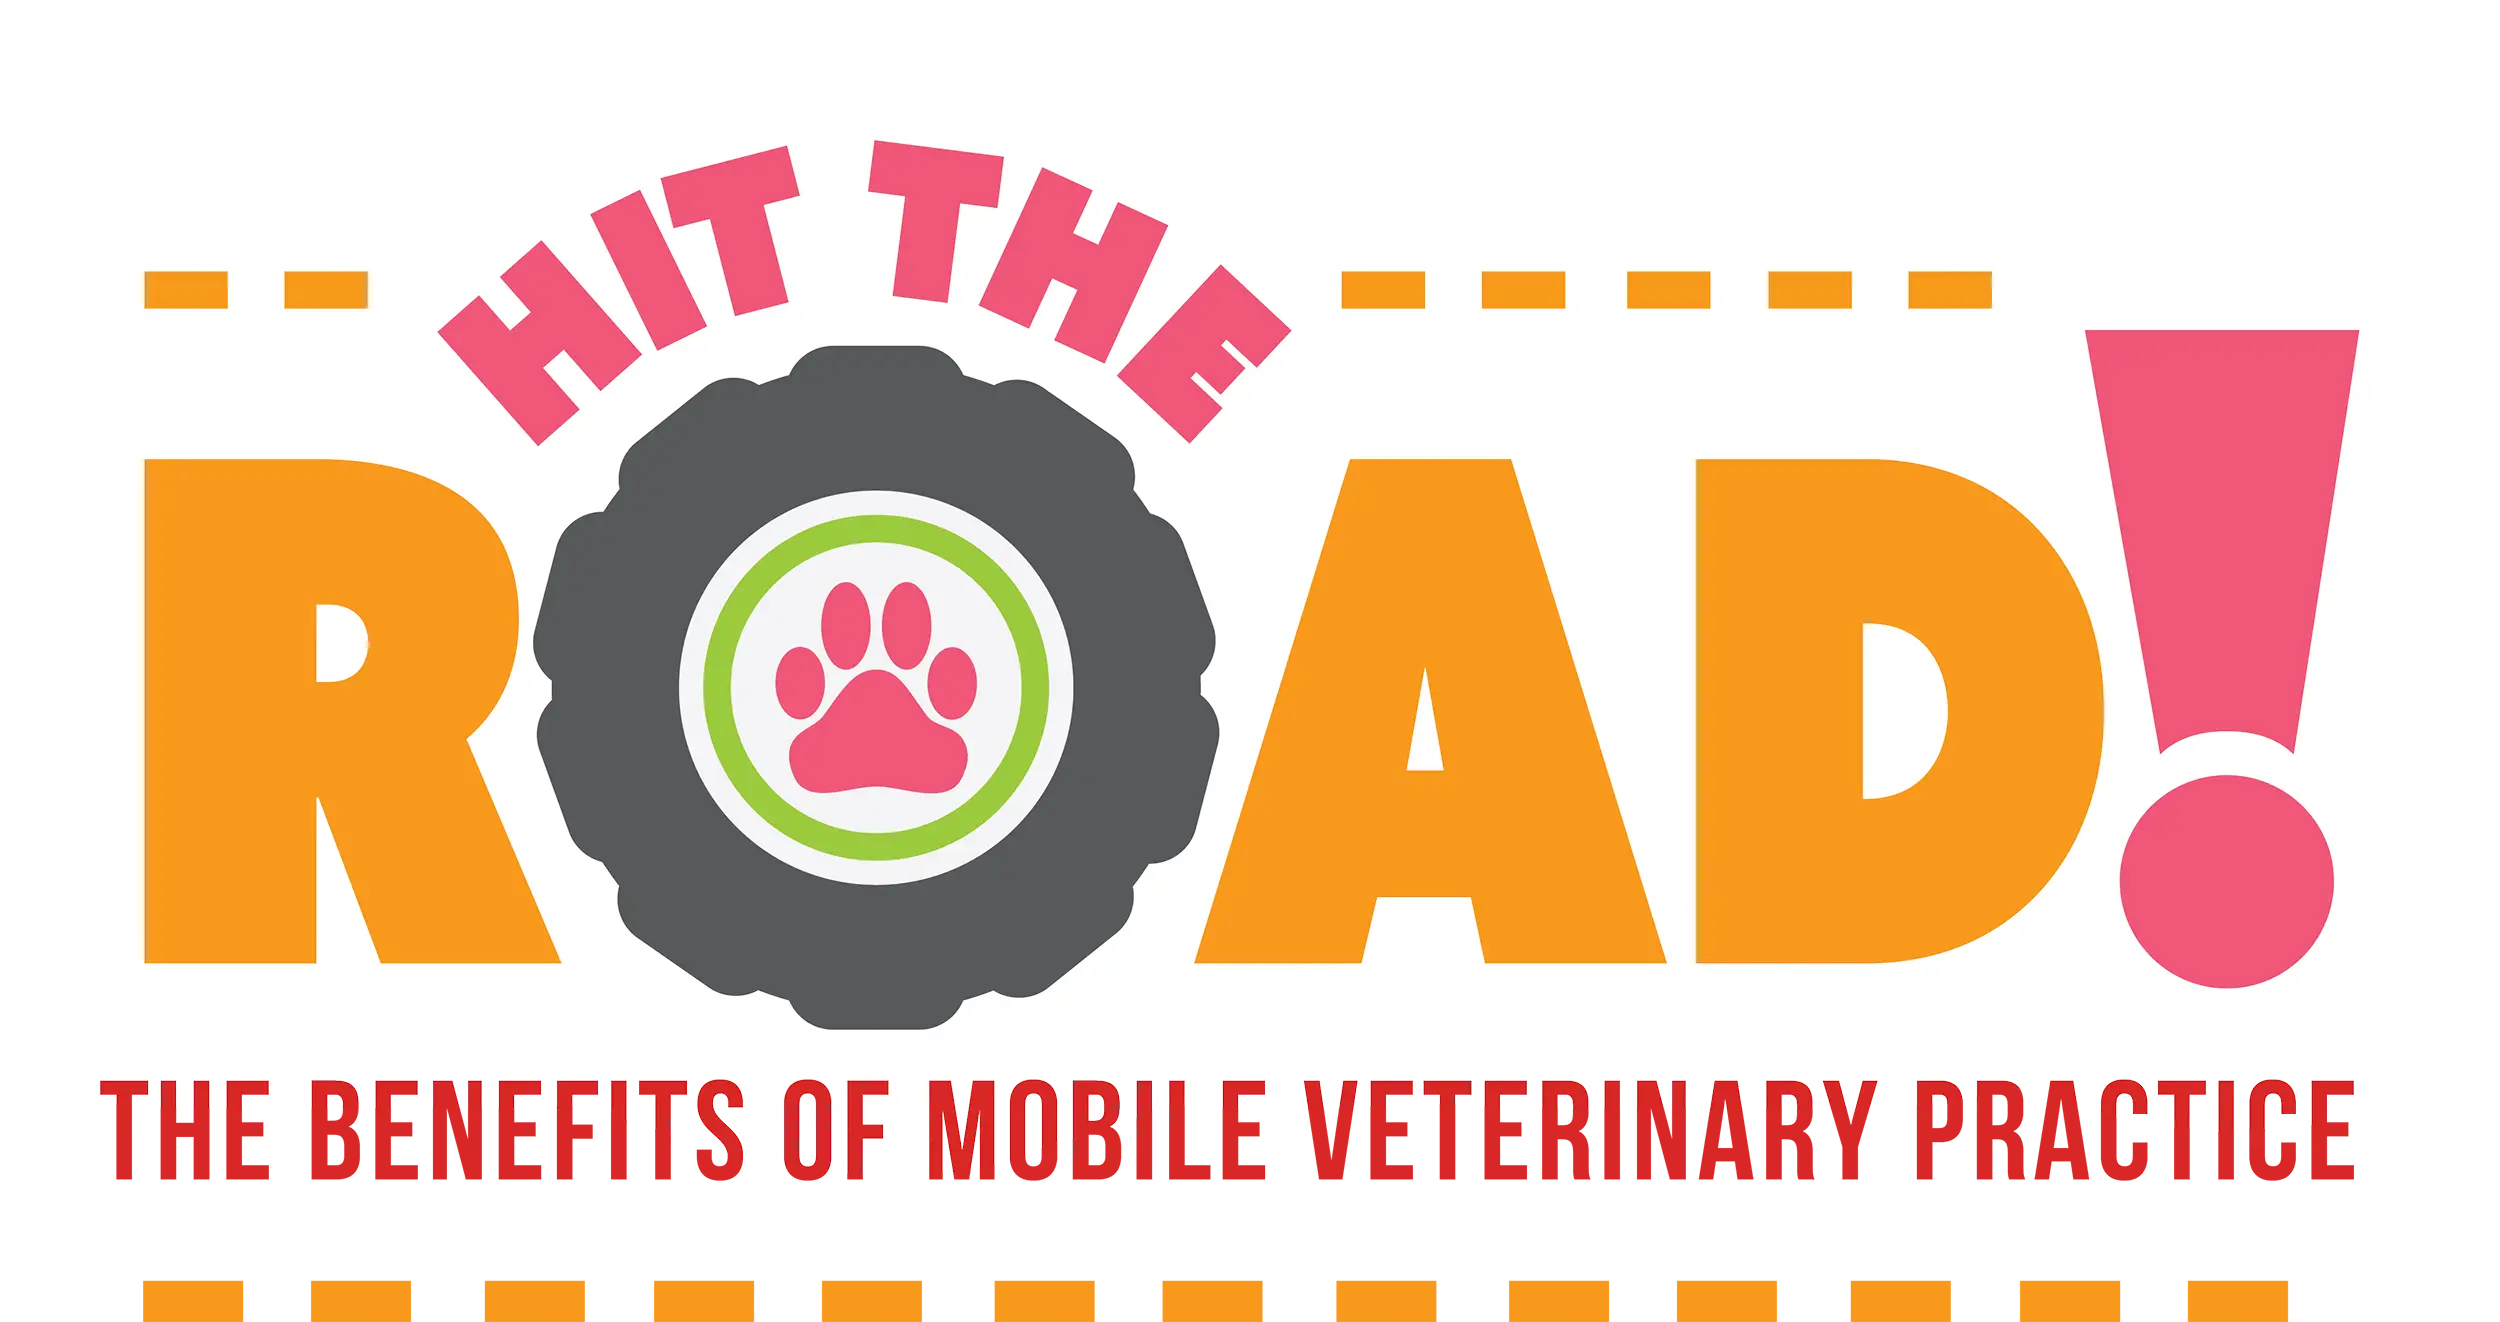 Hit the Road! The Benefits of Mobile Veterinary Practice title